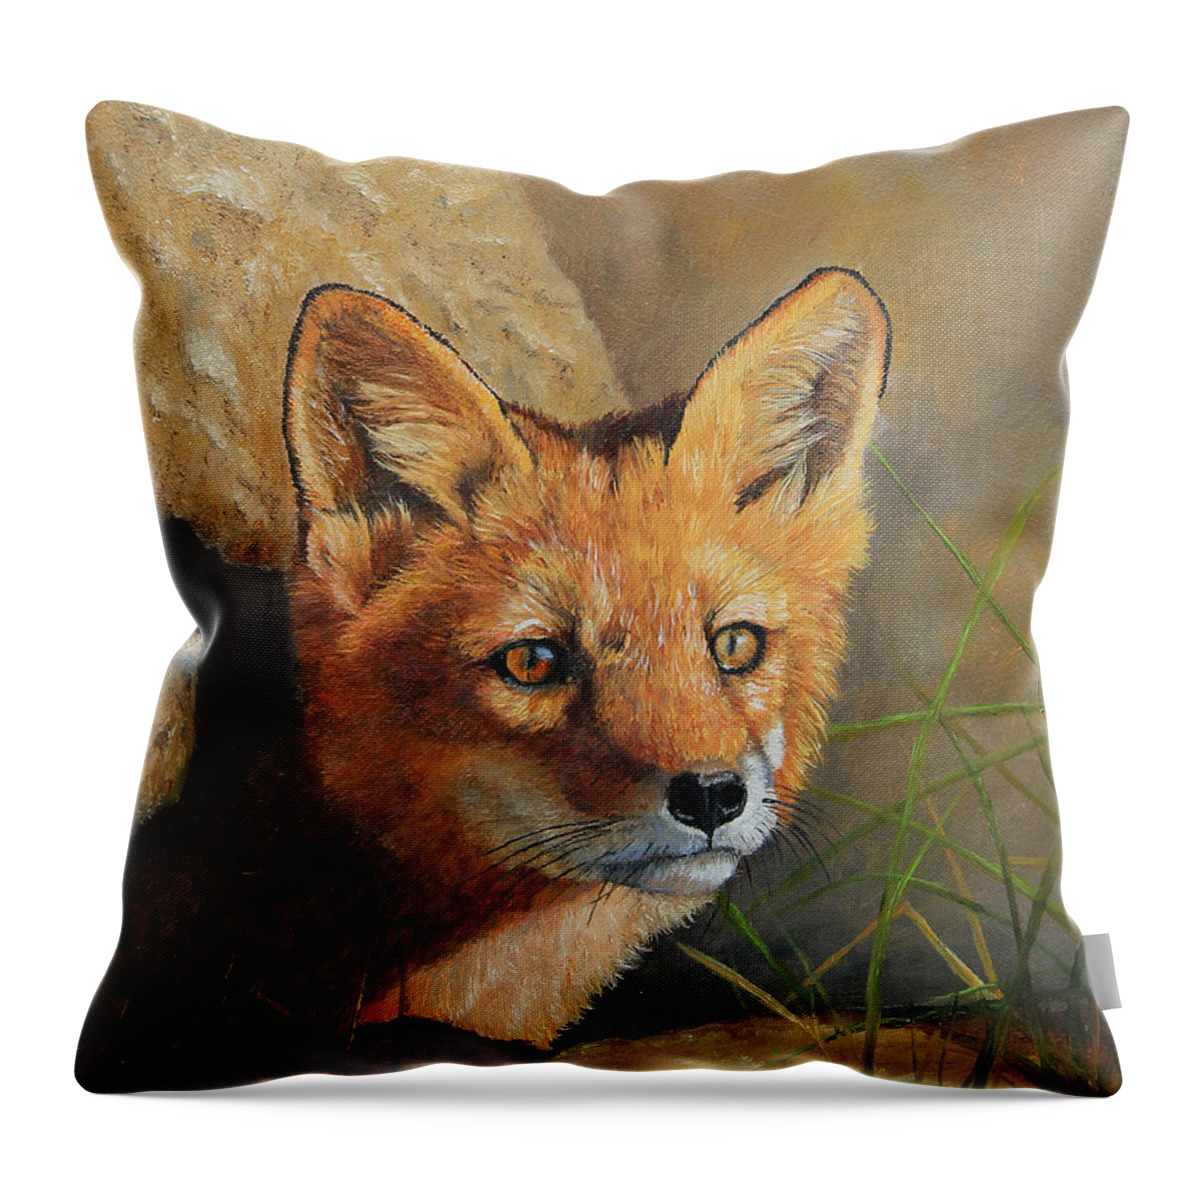 North American Wildlife Throw Pillow featuring the painting Curious - Red Fox Kit by Johanna Lerwick